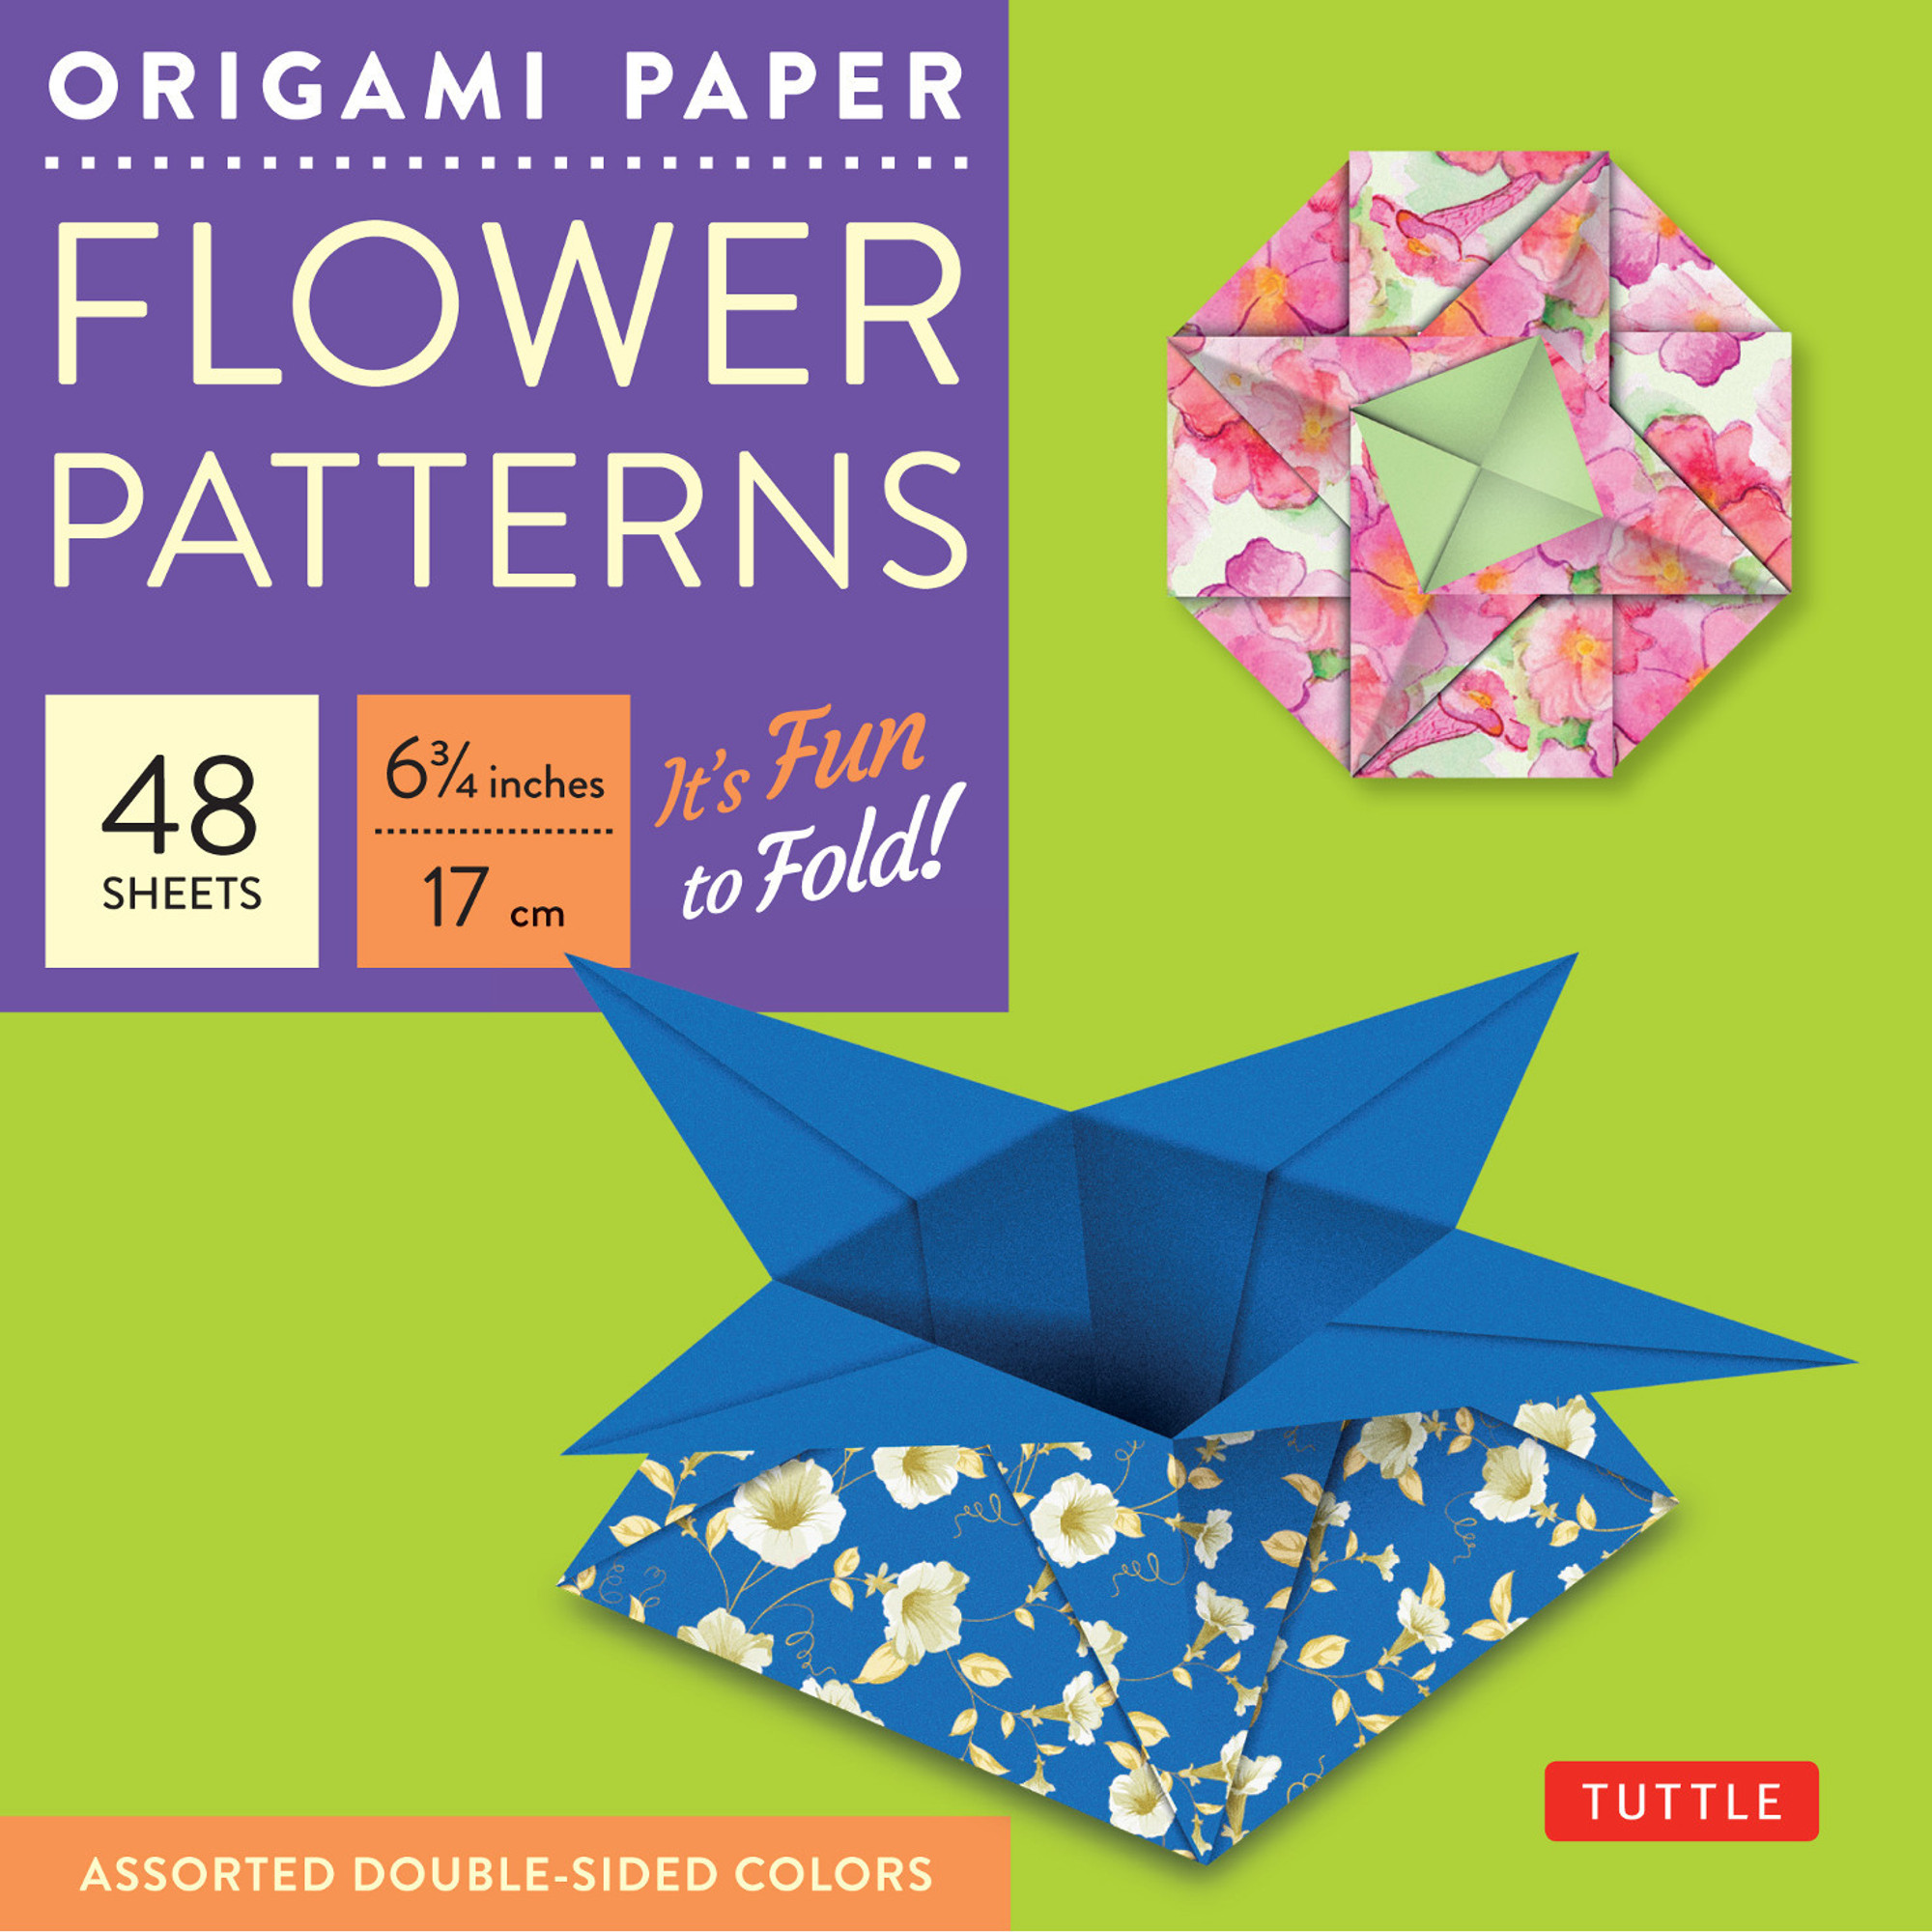 Origami Paper- Cherry Blossom Patterns Large 8 1/4 48 sh (9780804844840) -  Tuttle Publishing